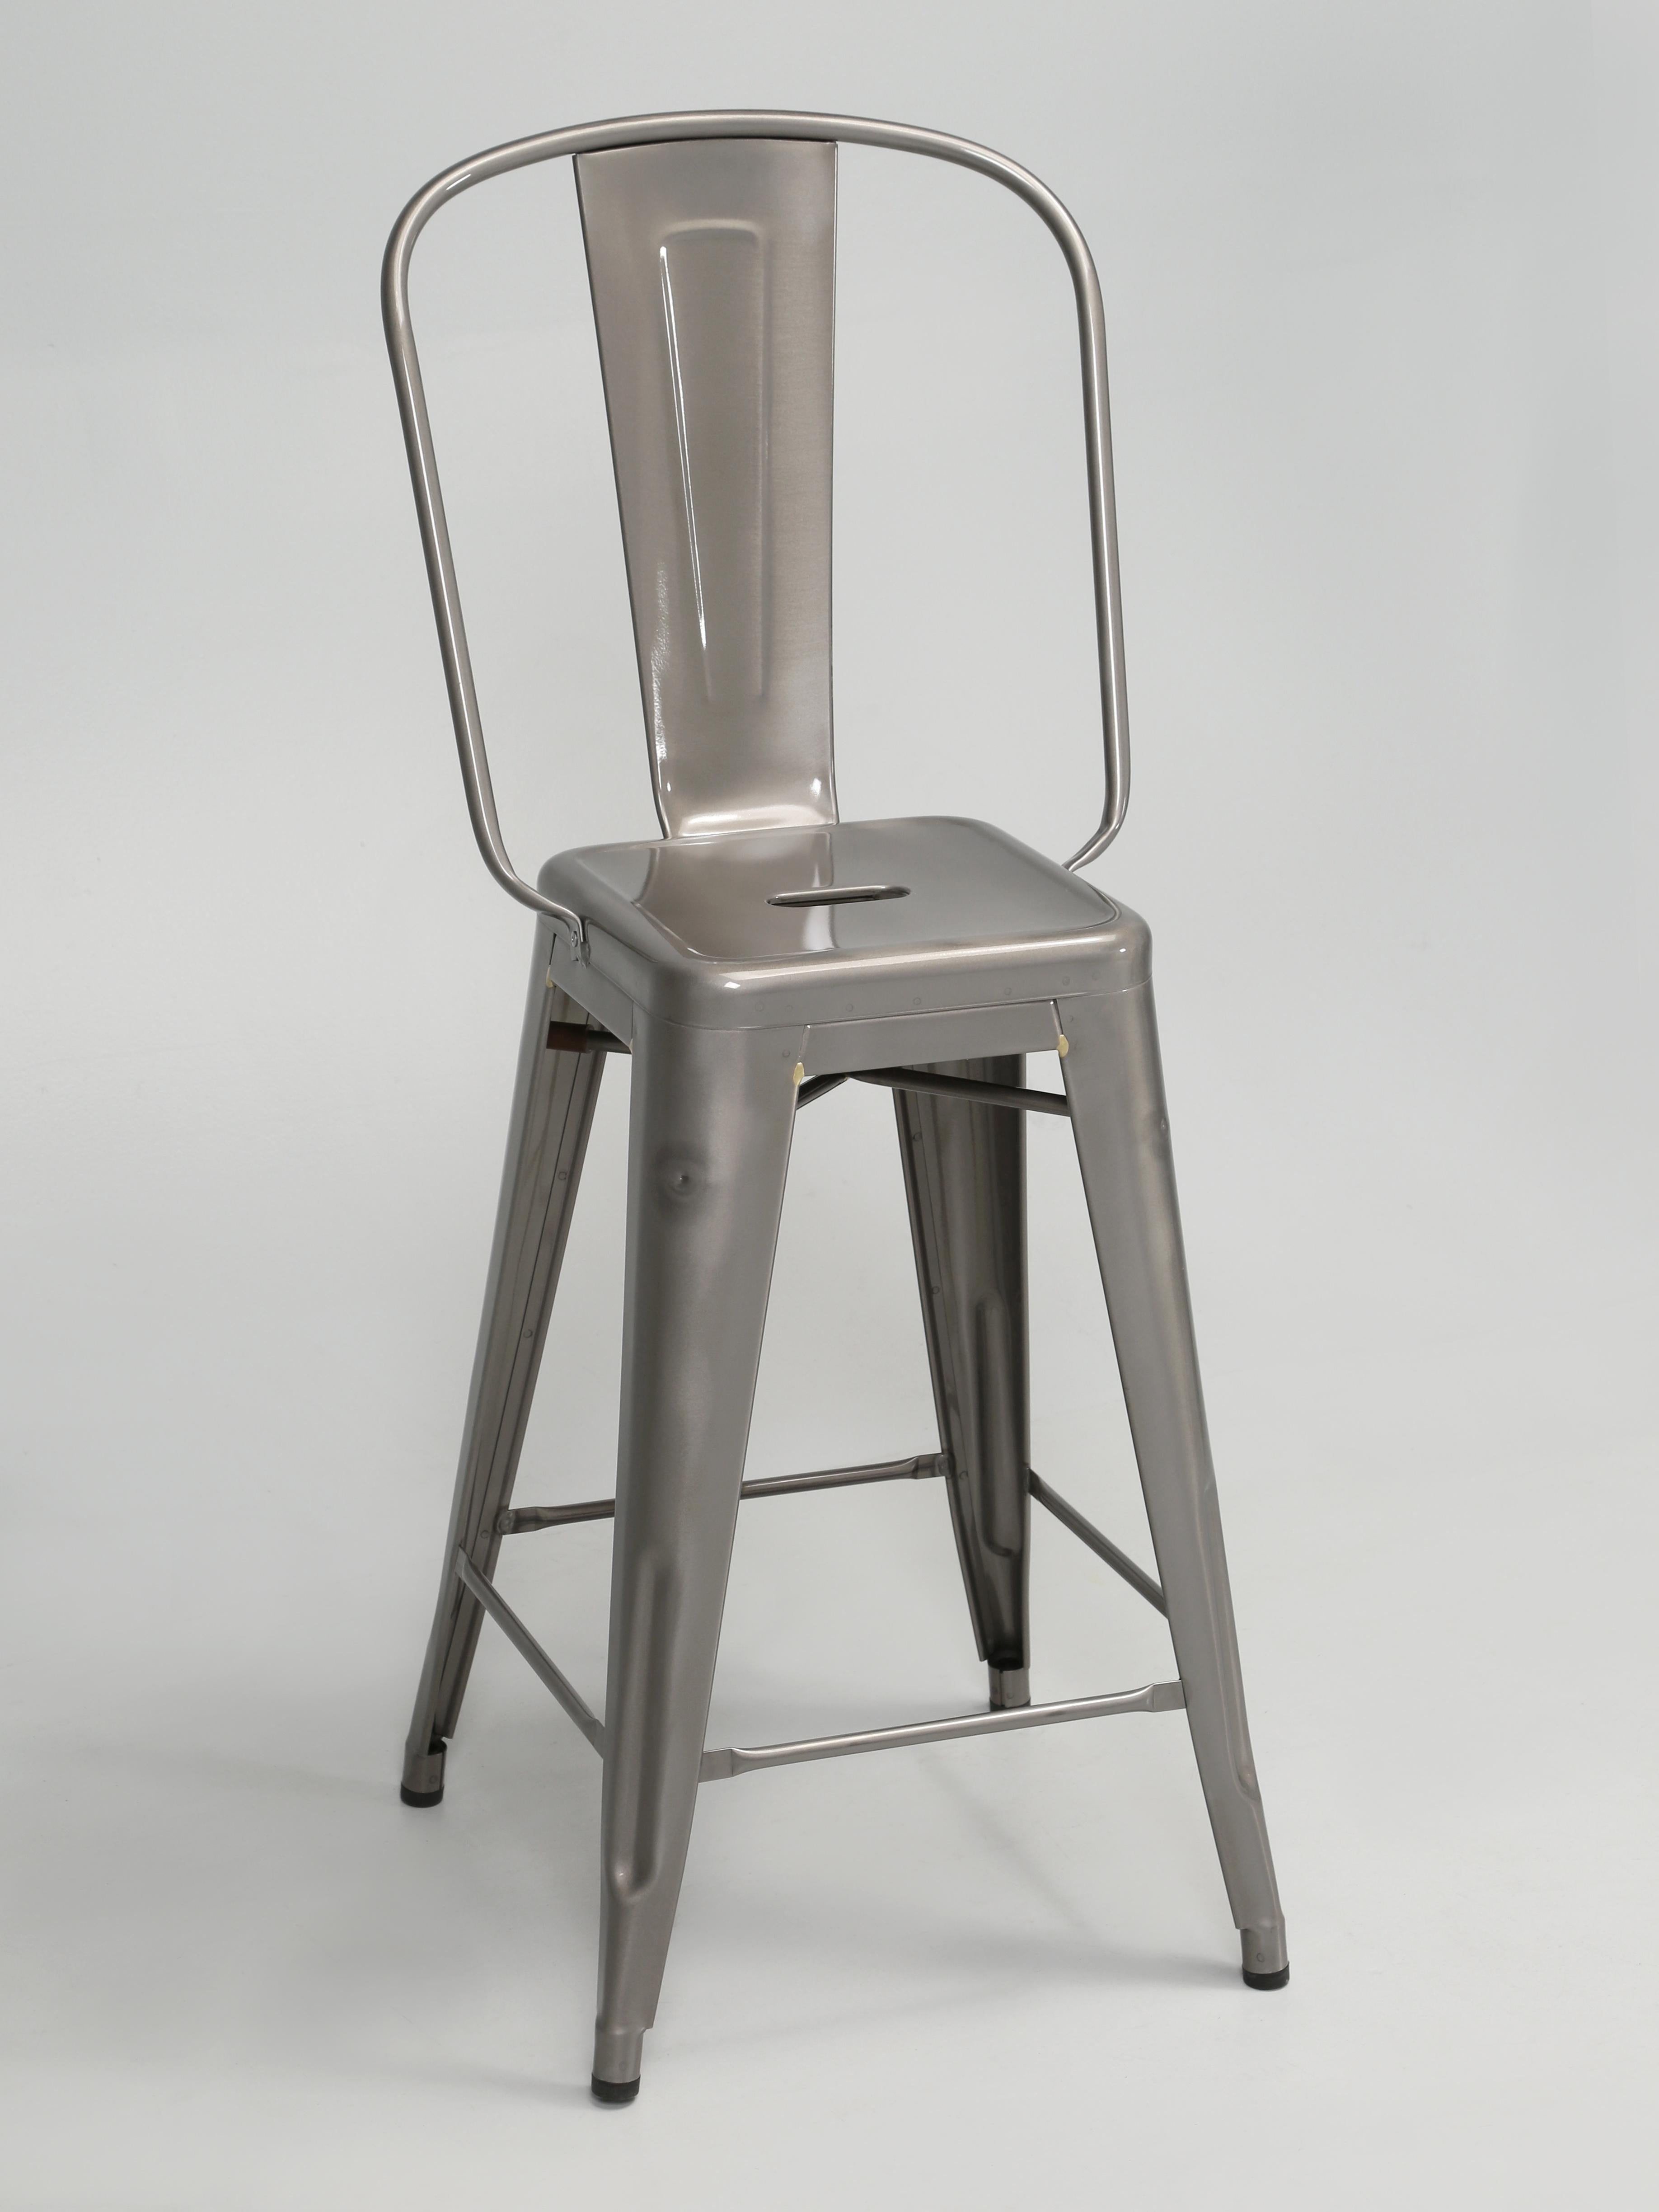 how high are counter height stools